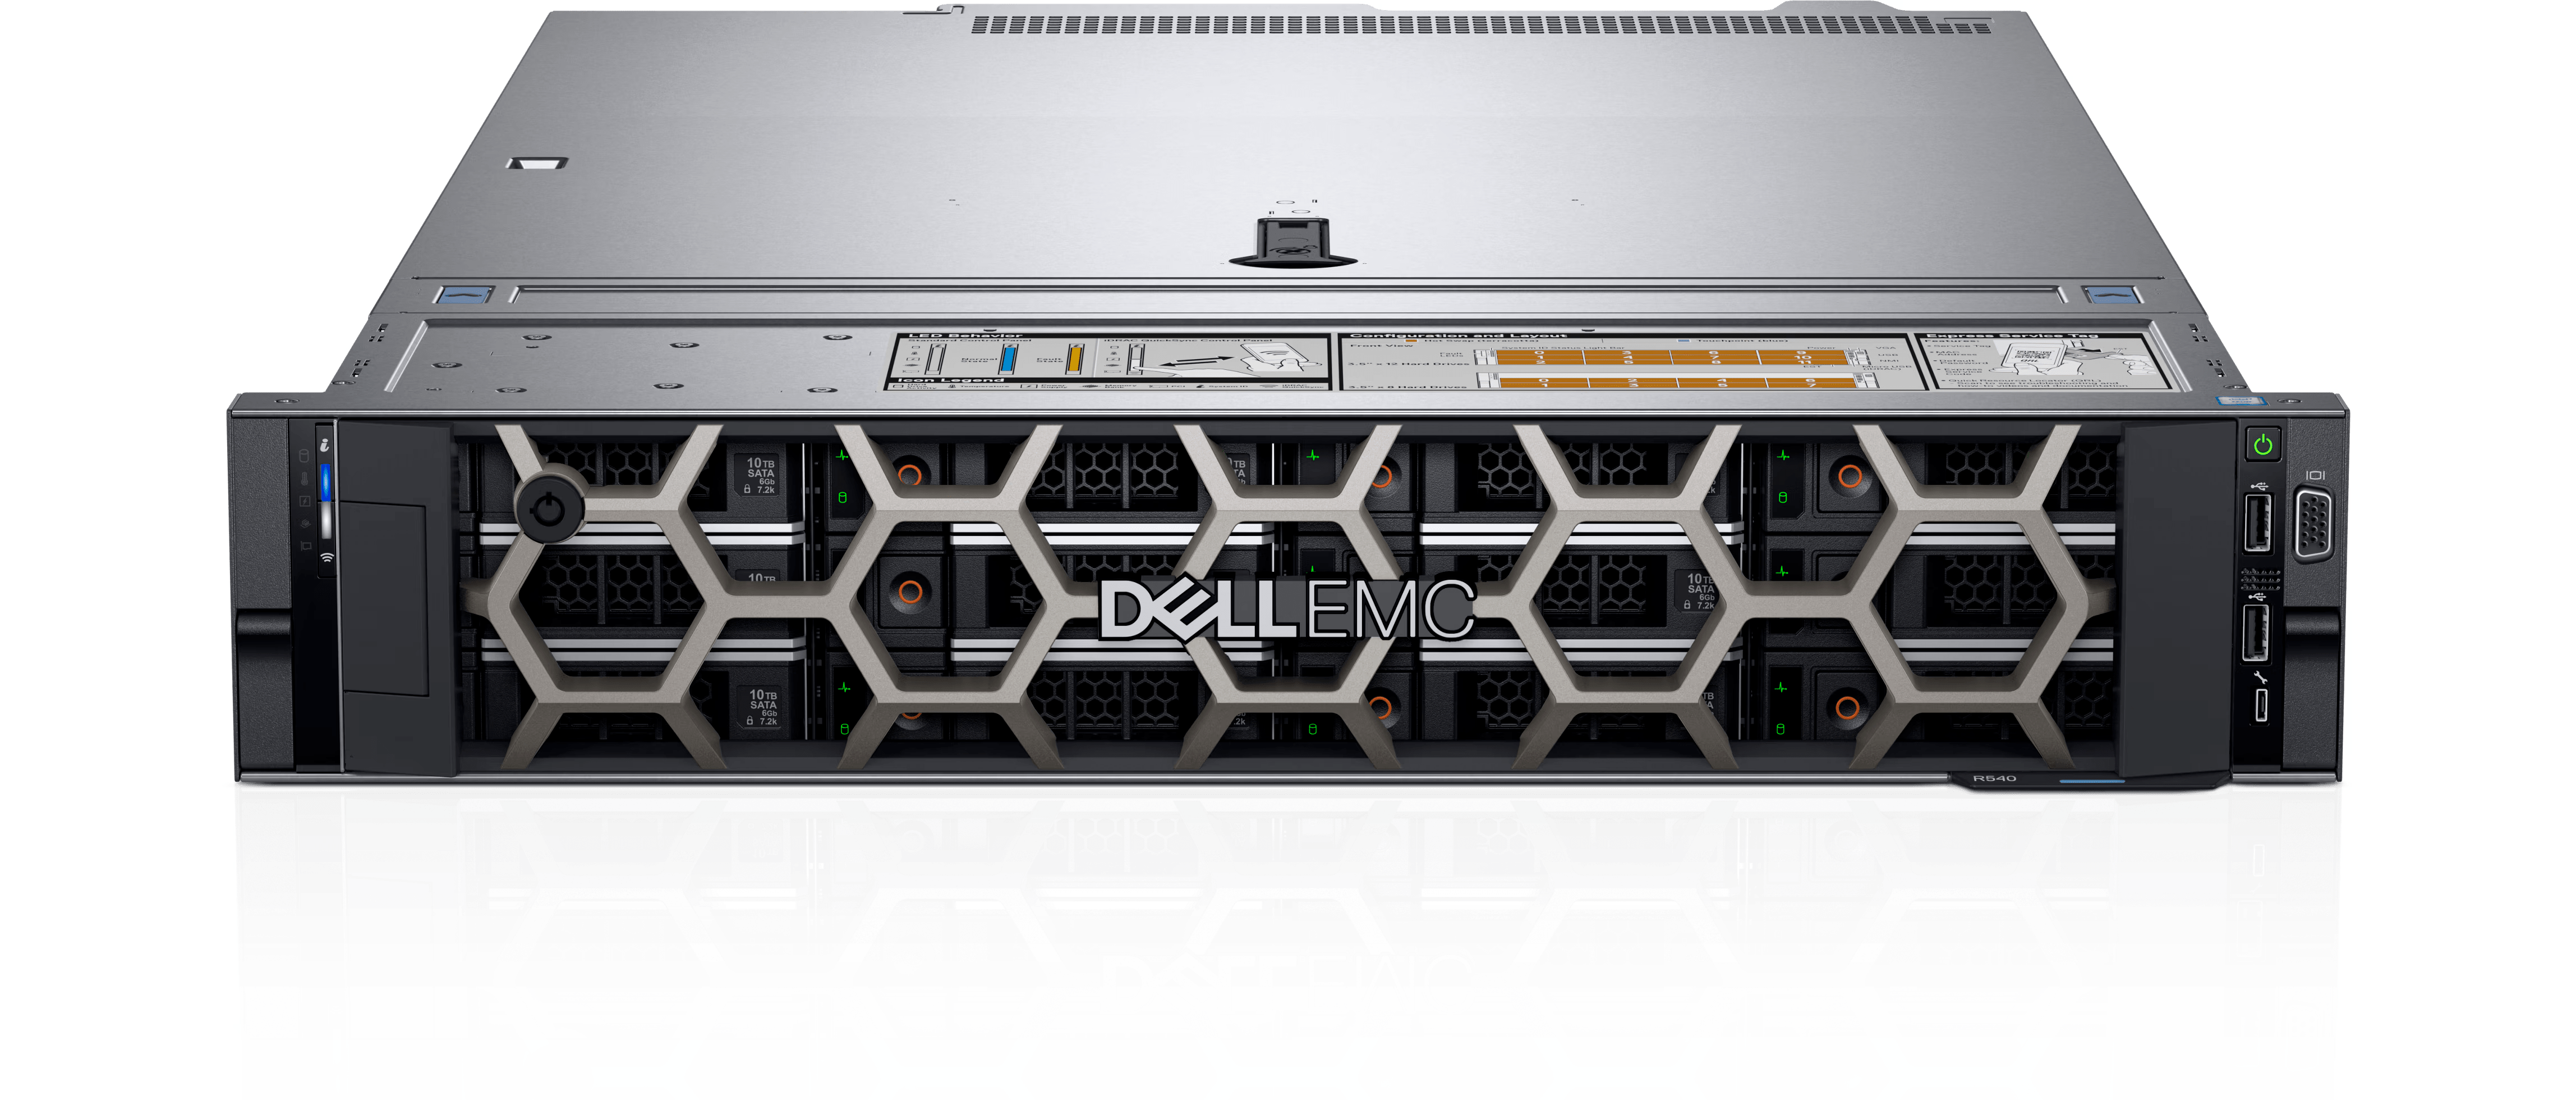 DELL SERVER 2.0 POWER EDGE R540 3.5" CHASSIS WITH UPTO 8 3.5"/2.5" HDD'S/SSD'S 2U - Golchha Computers